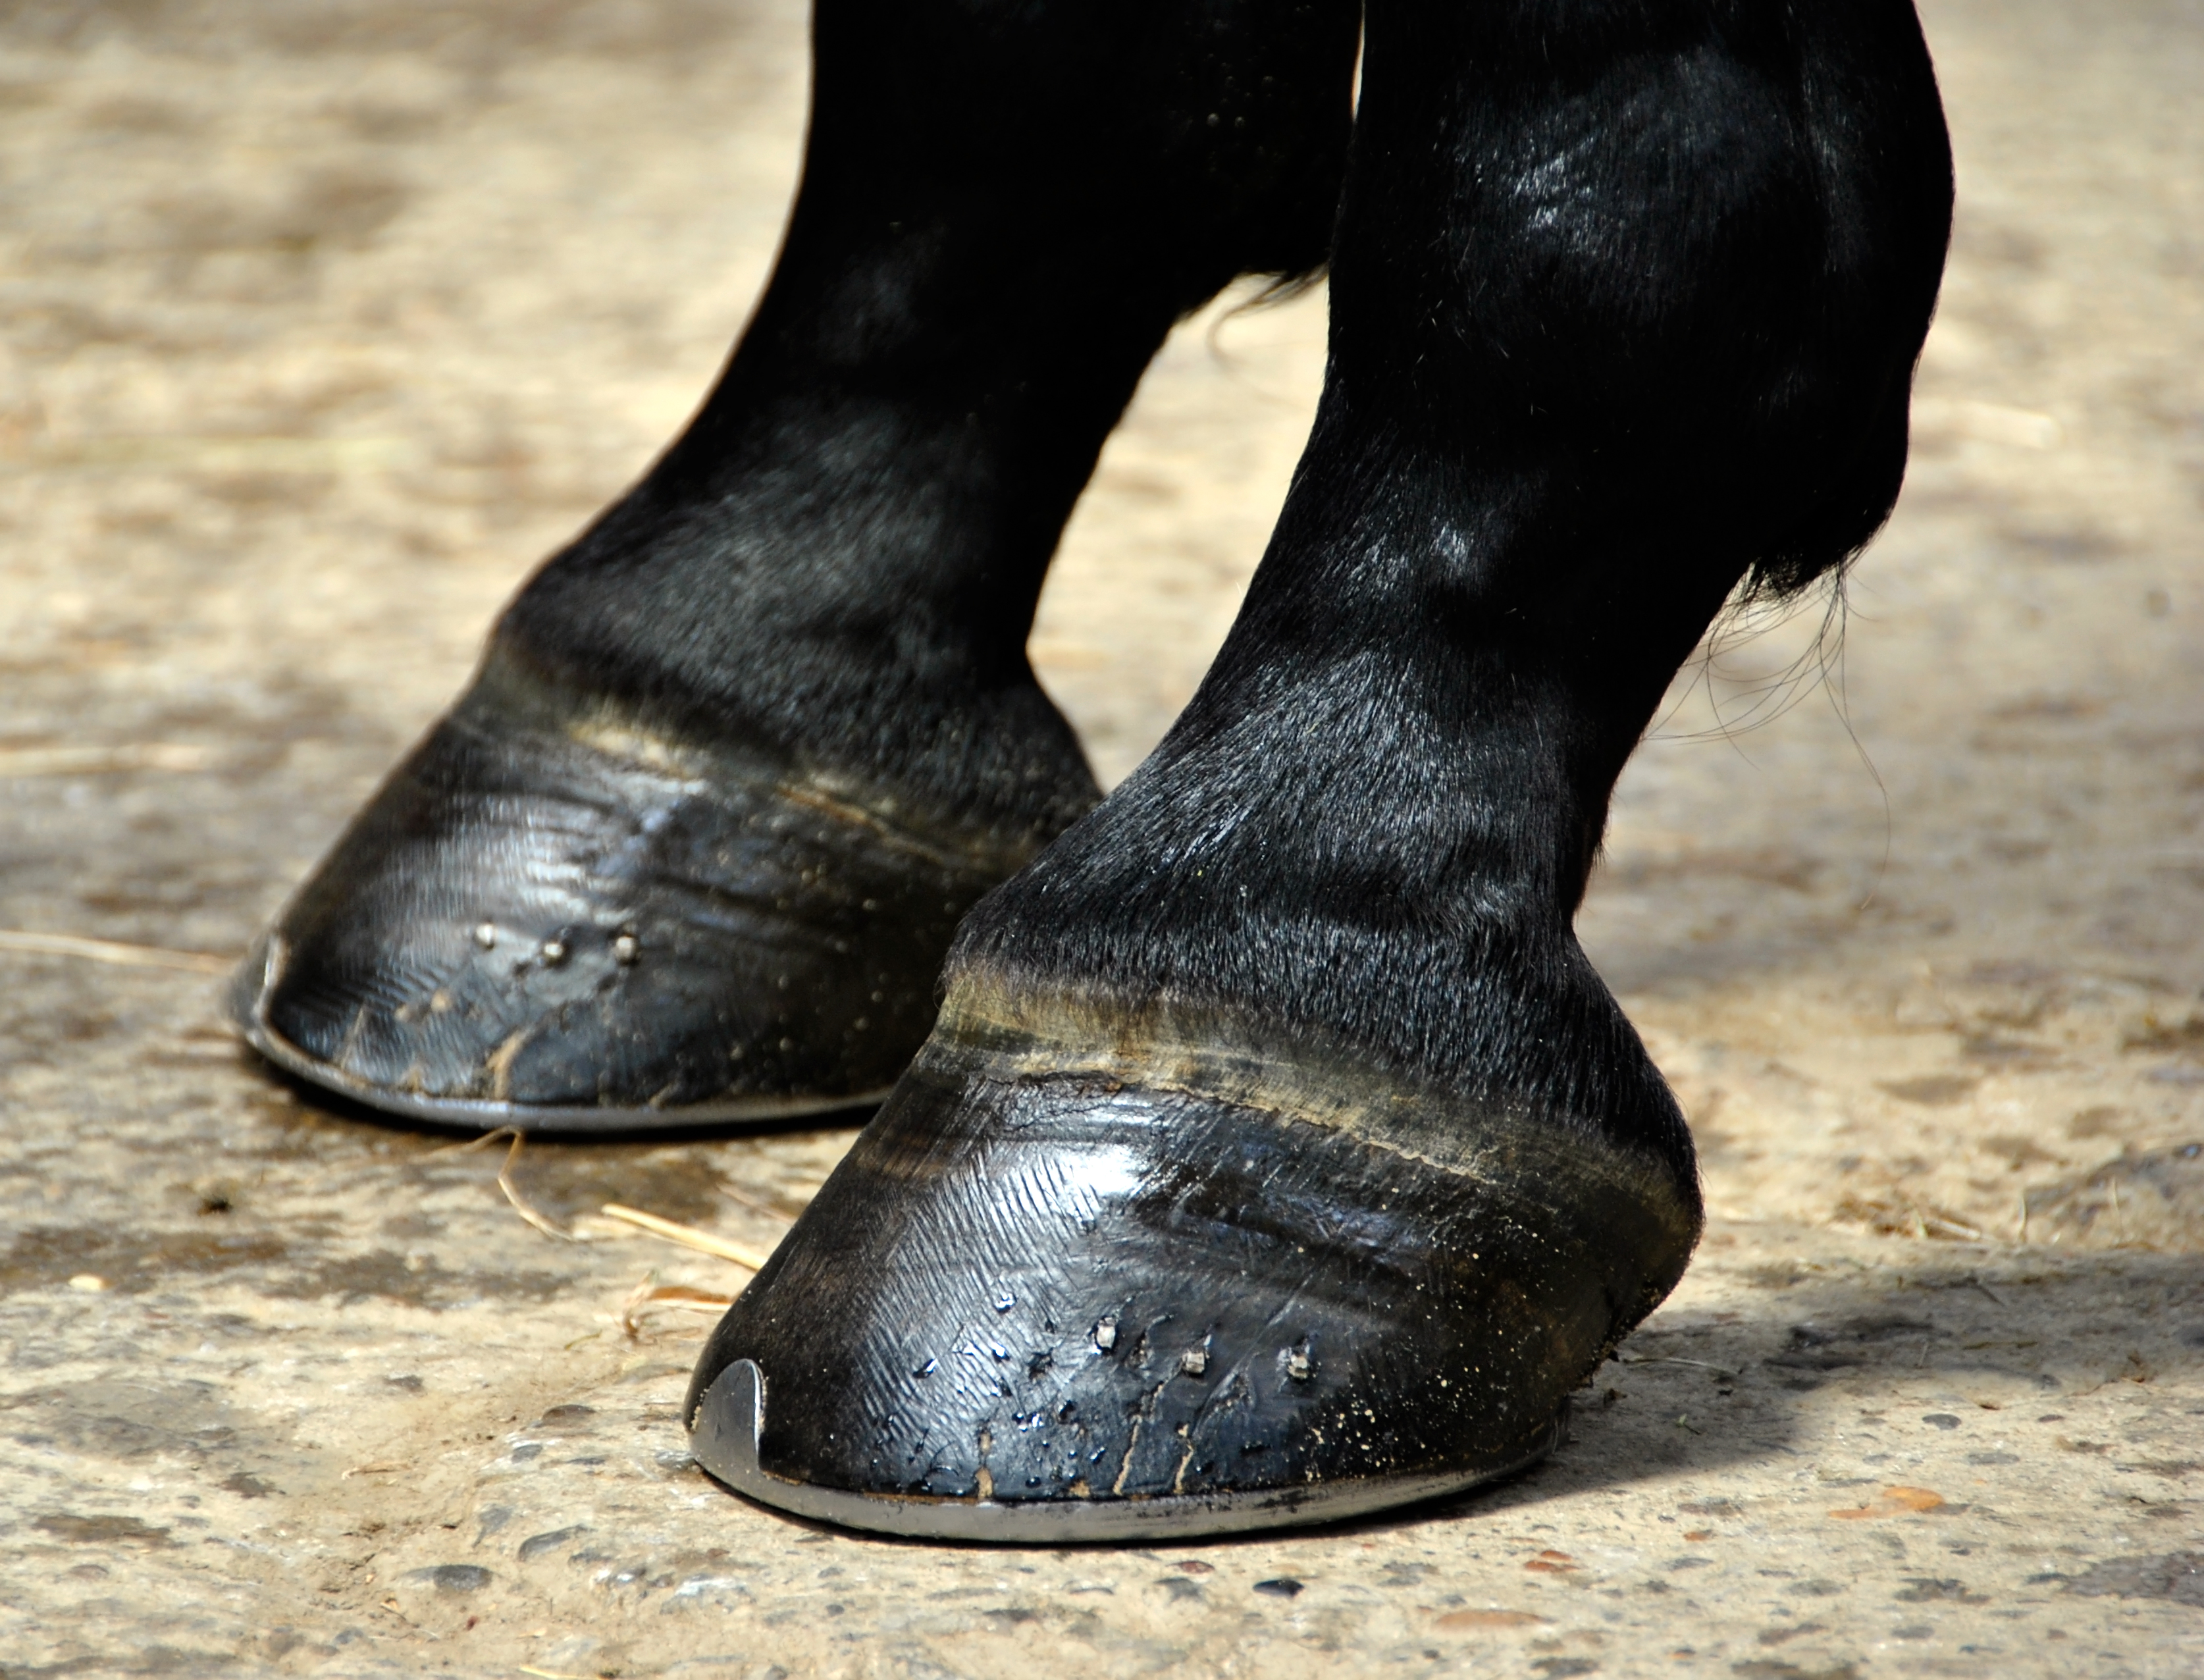 It's as painful as horses wearing high heels, QF expert says of equine  disease | Qatar Foundation